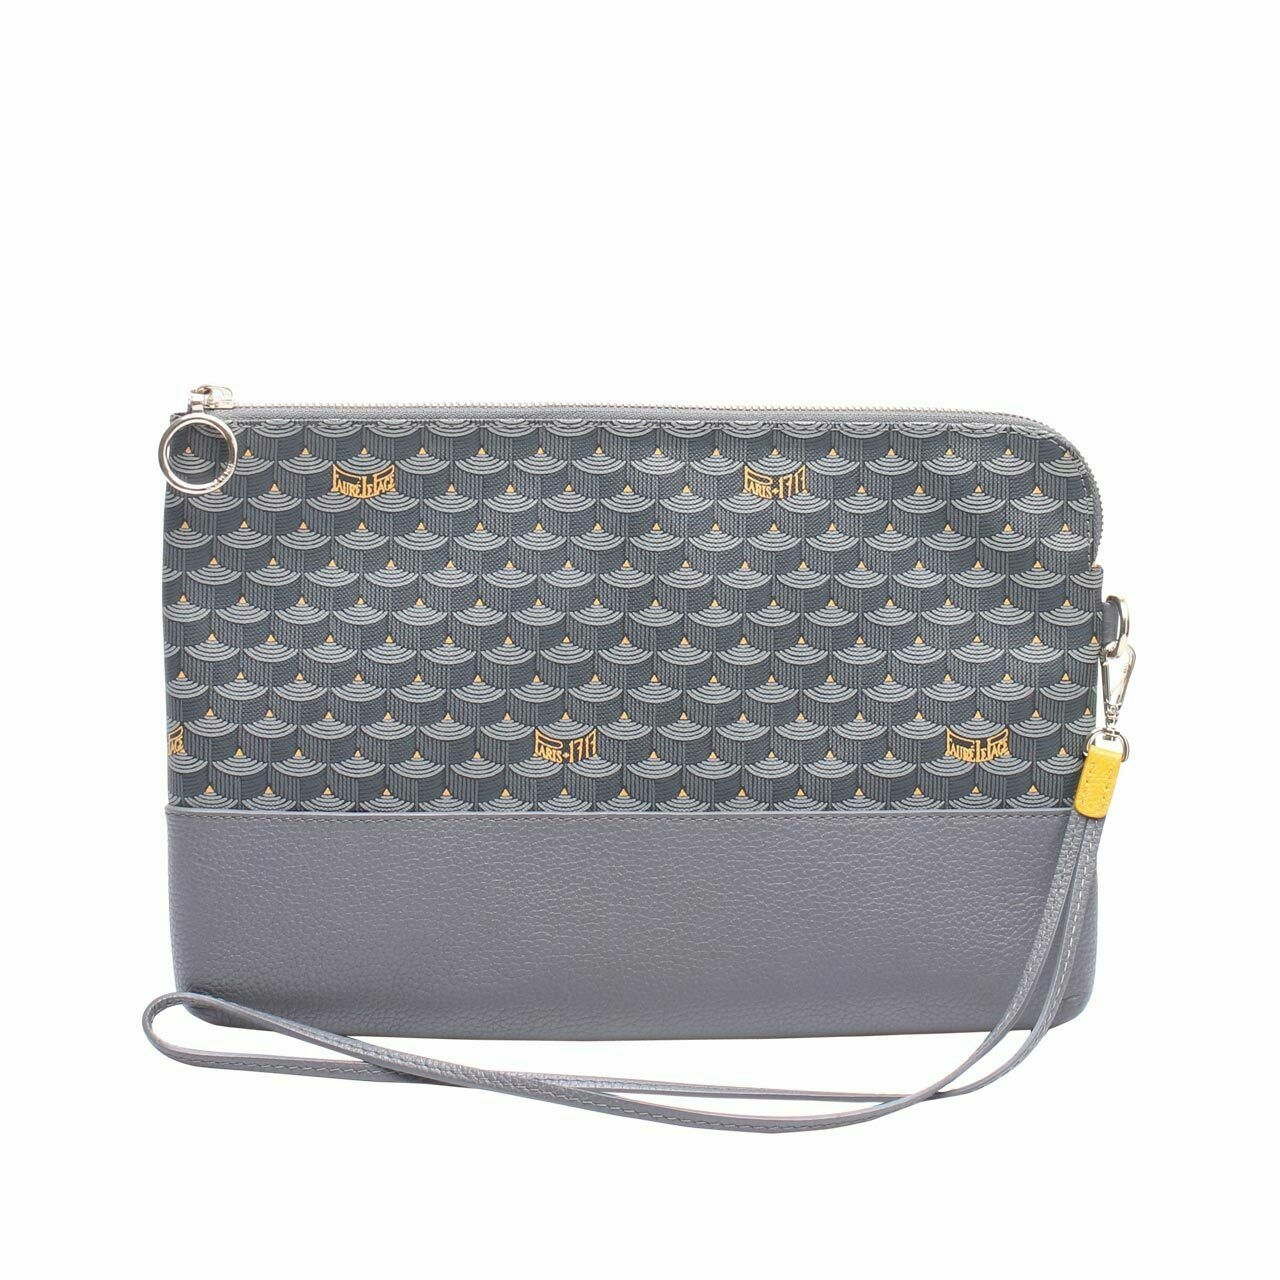 Faure Le Page Grey Cloth Small Bag Pouch